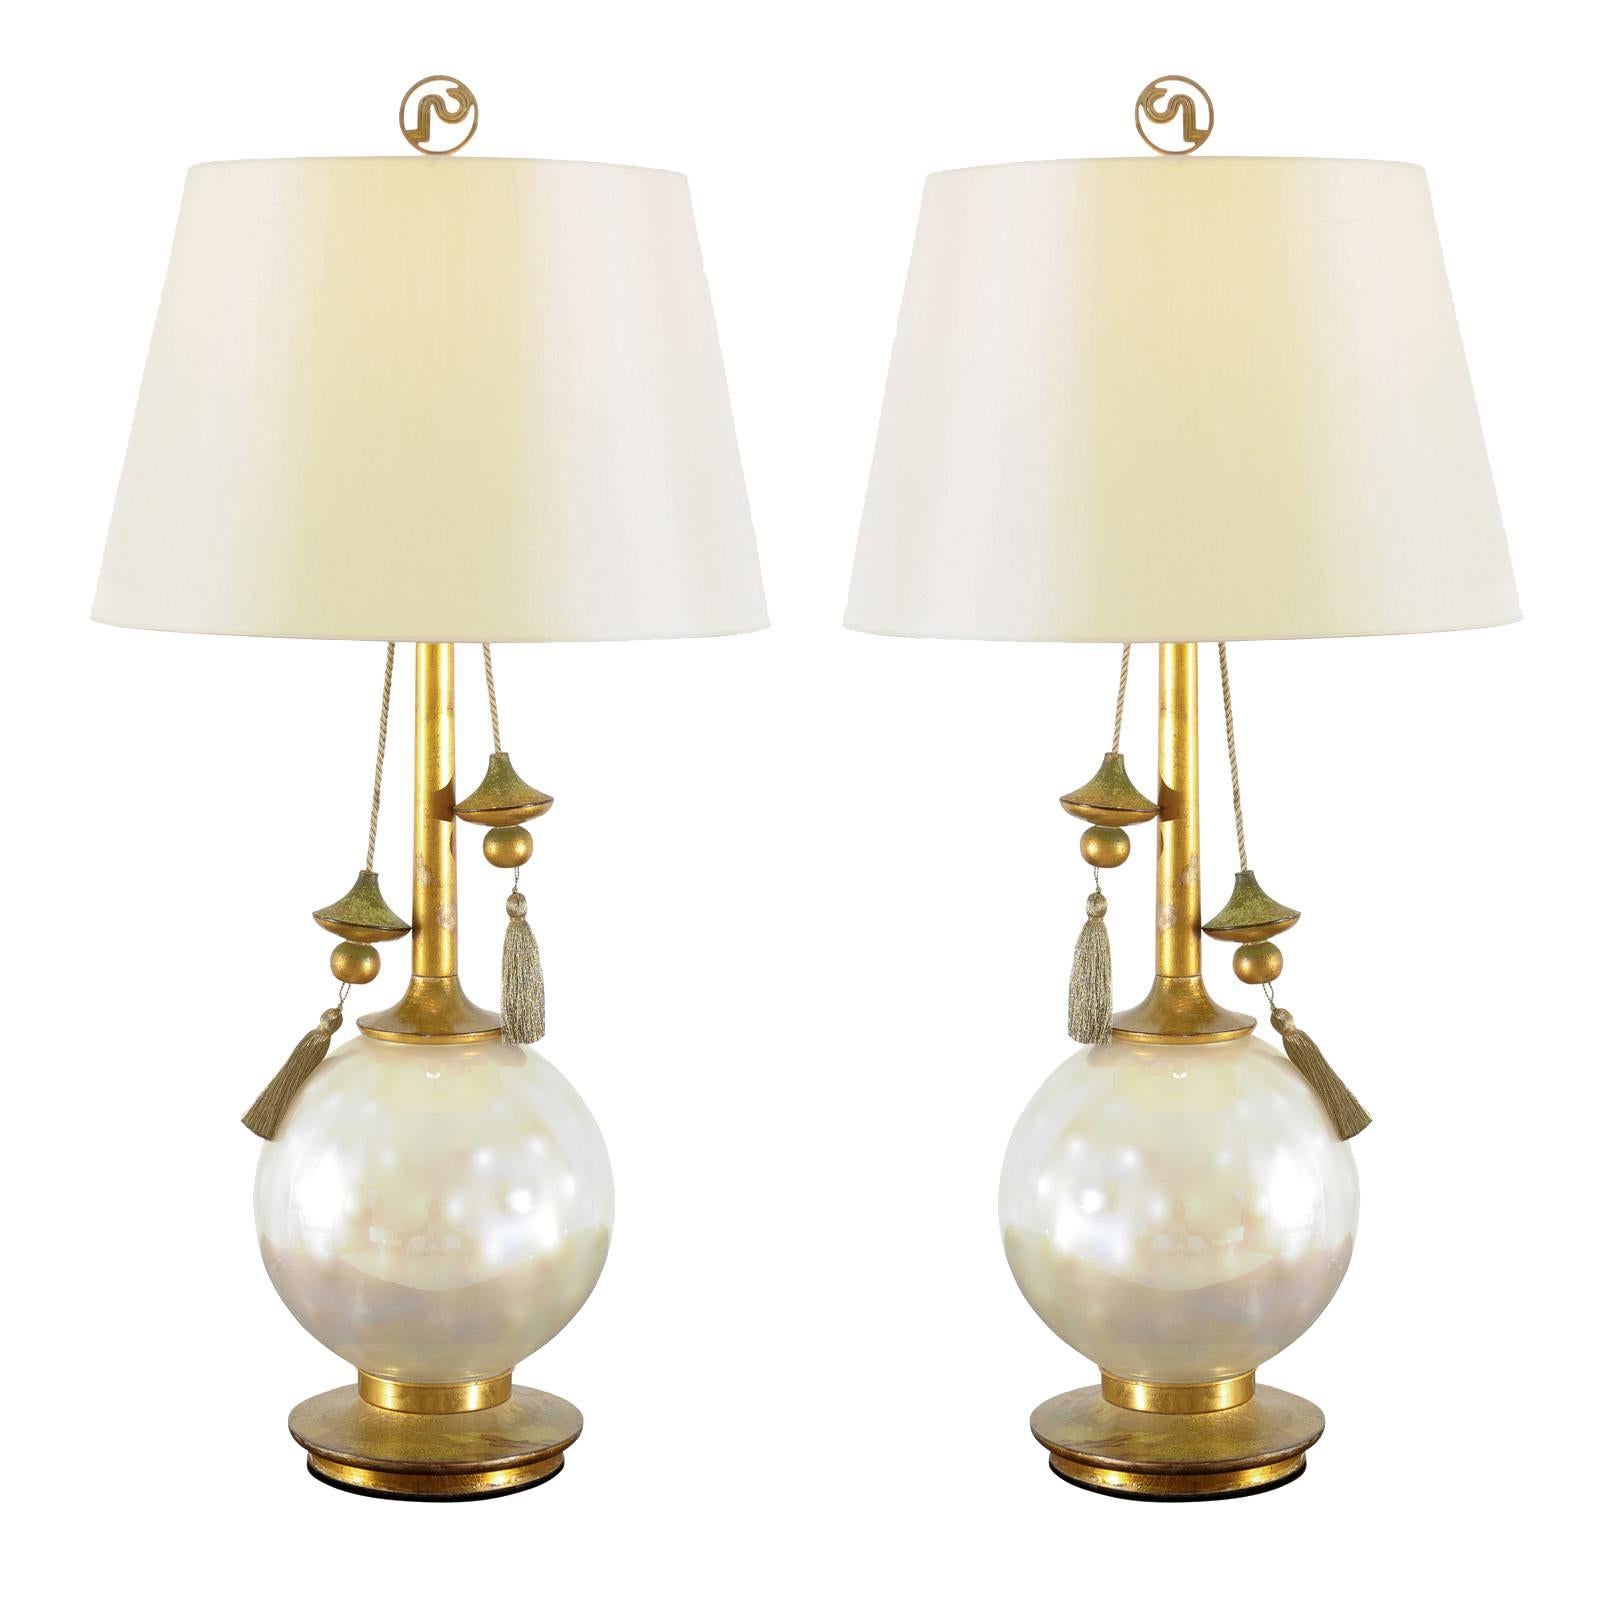 Rare Pair of Blown Glass and Giltwood Pearl Lamps by Frederick Cooper